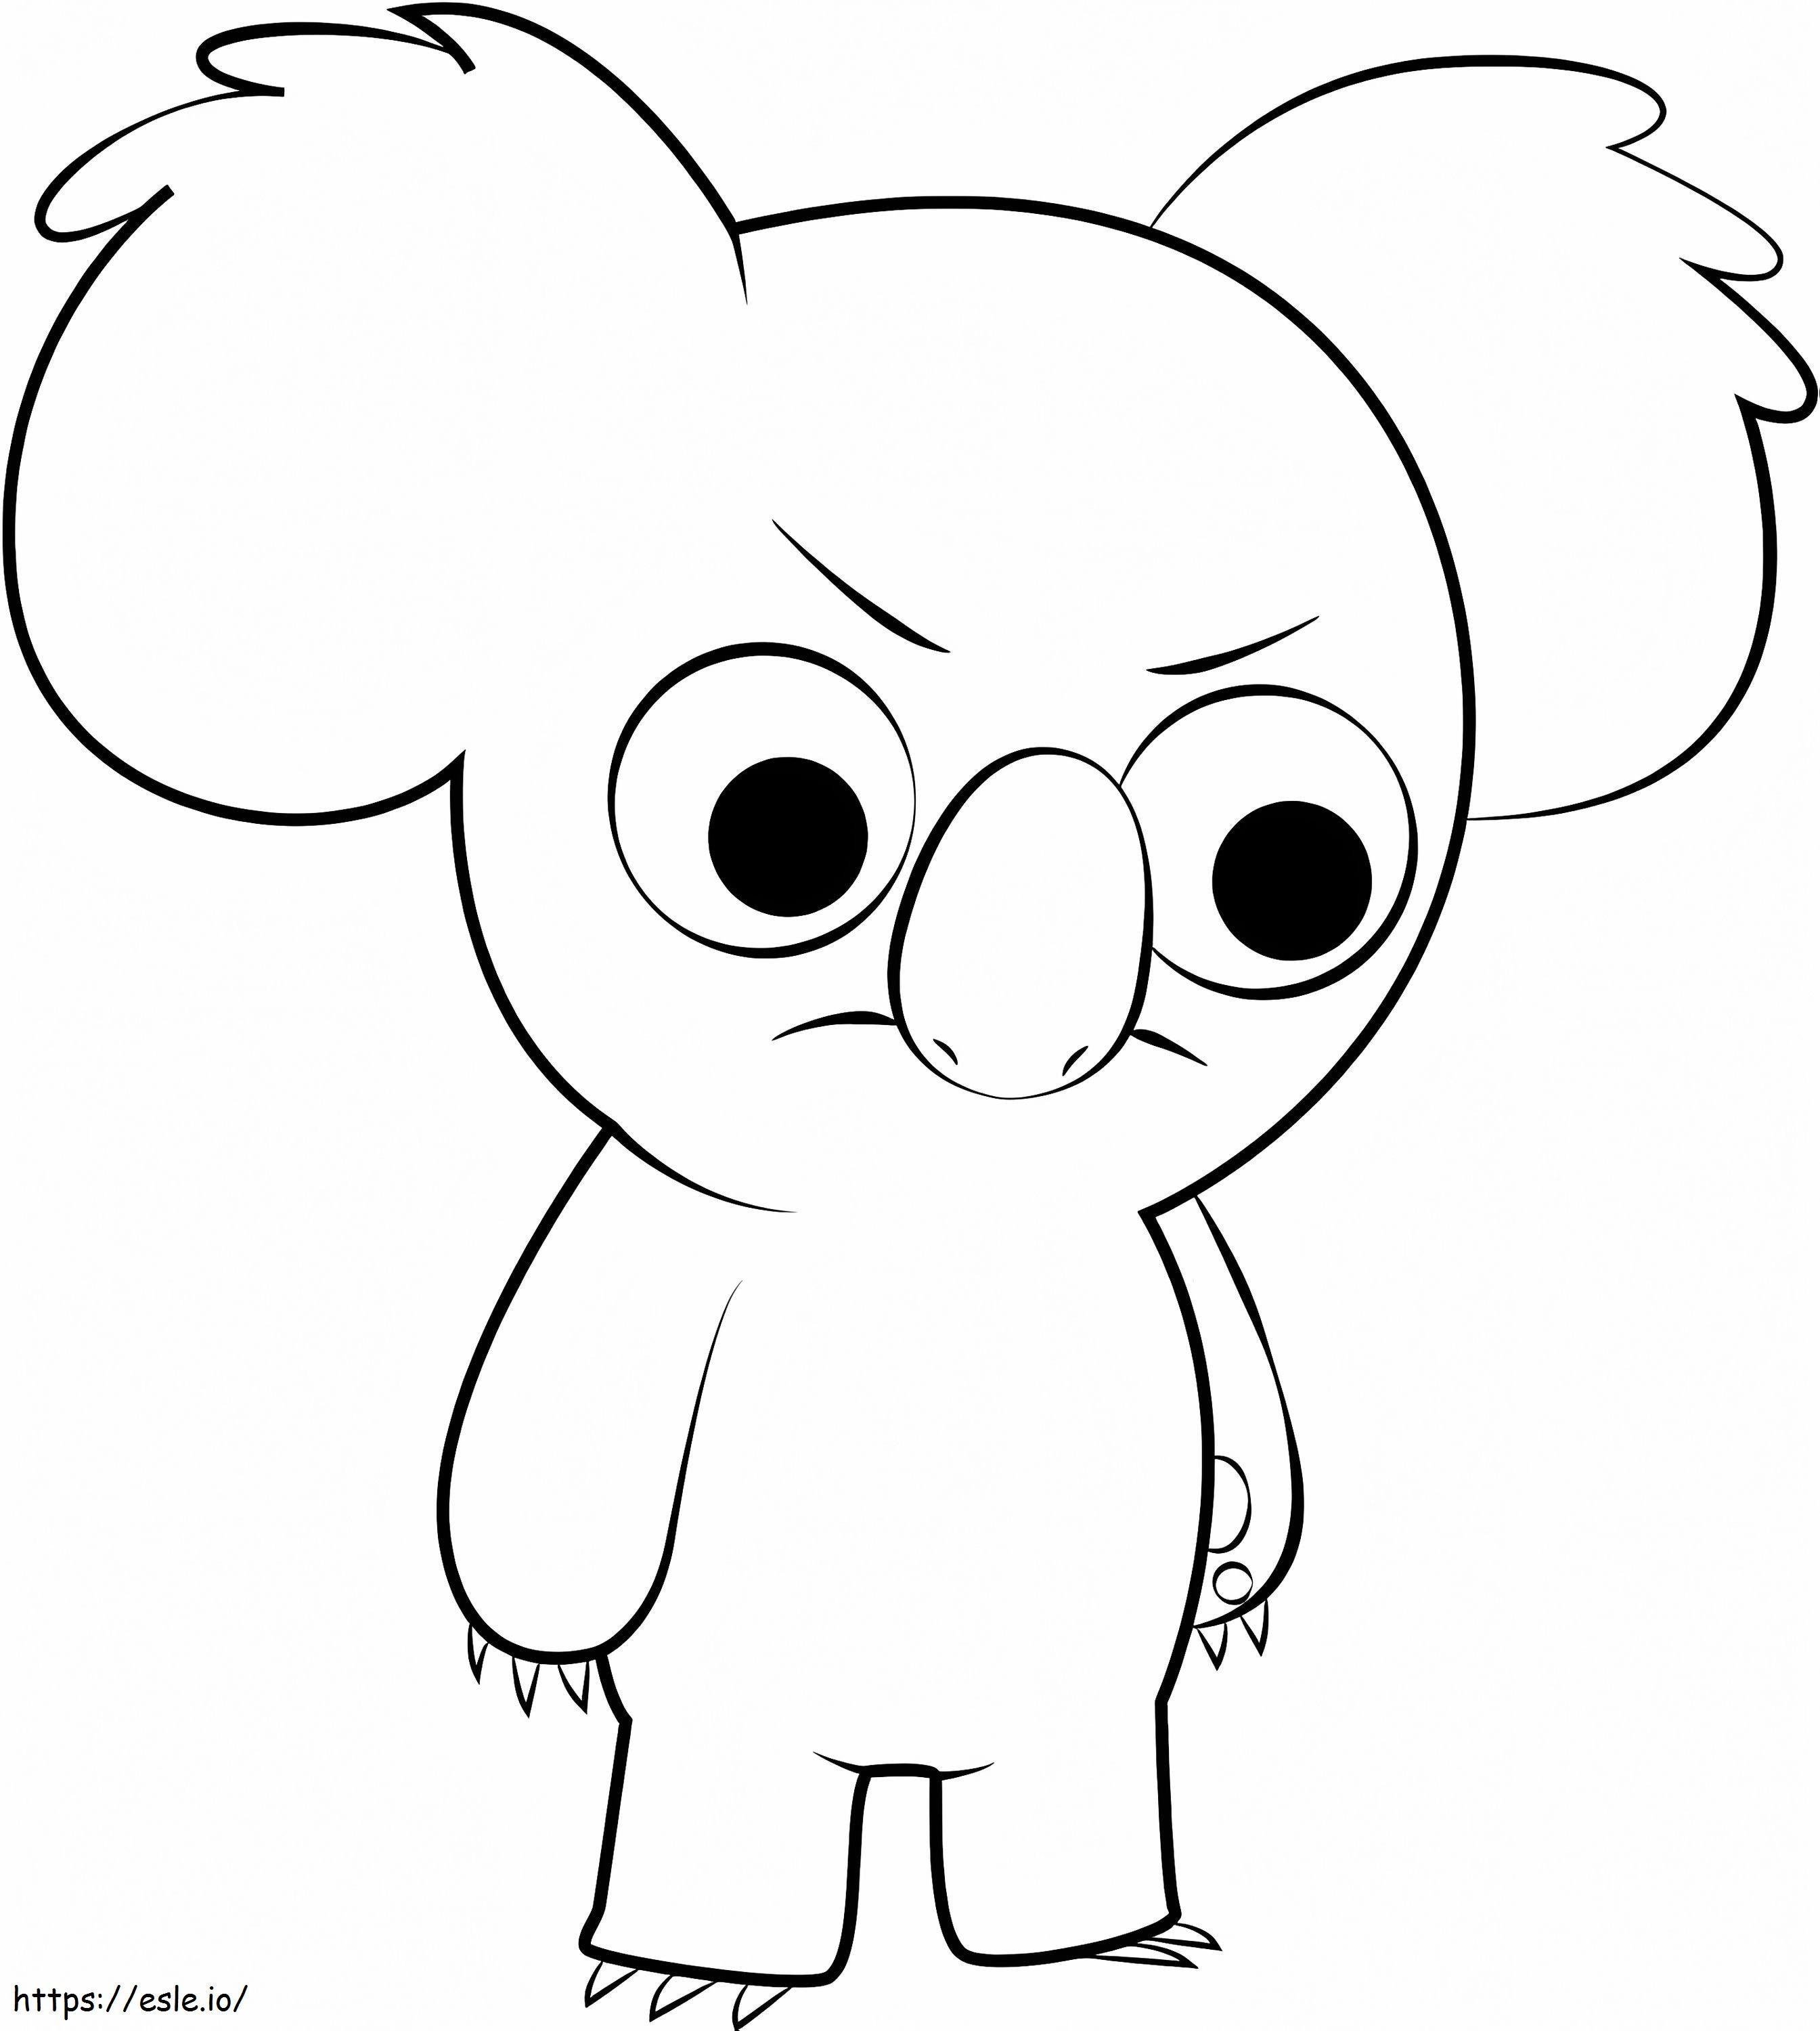 Angry Nom Nom coloring page